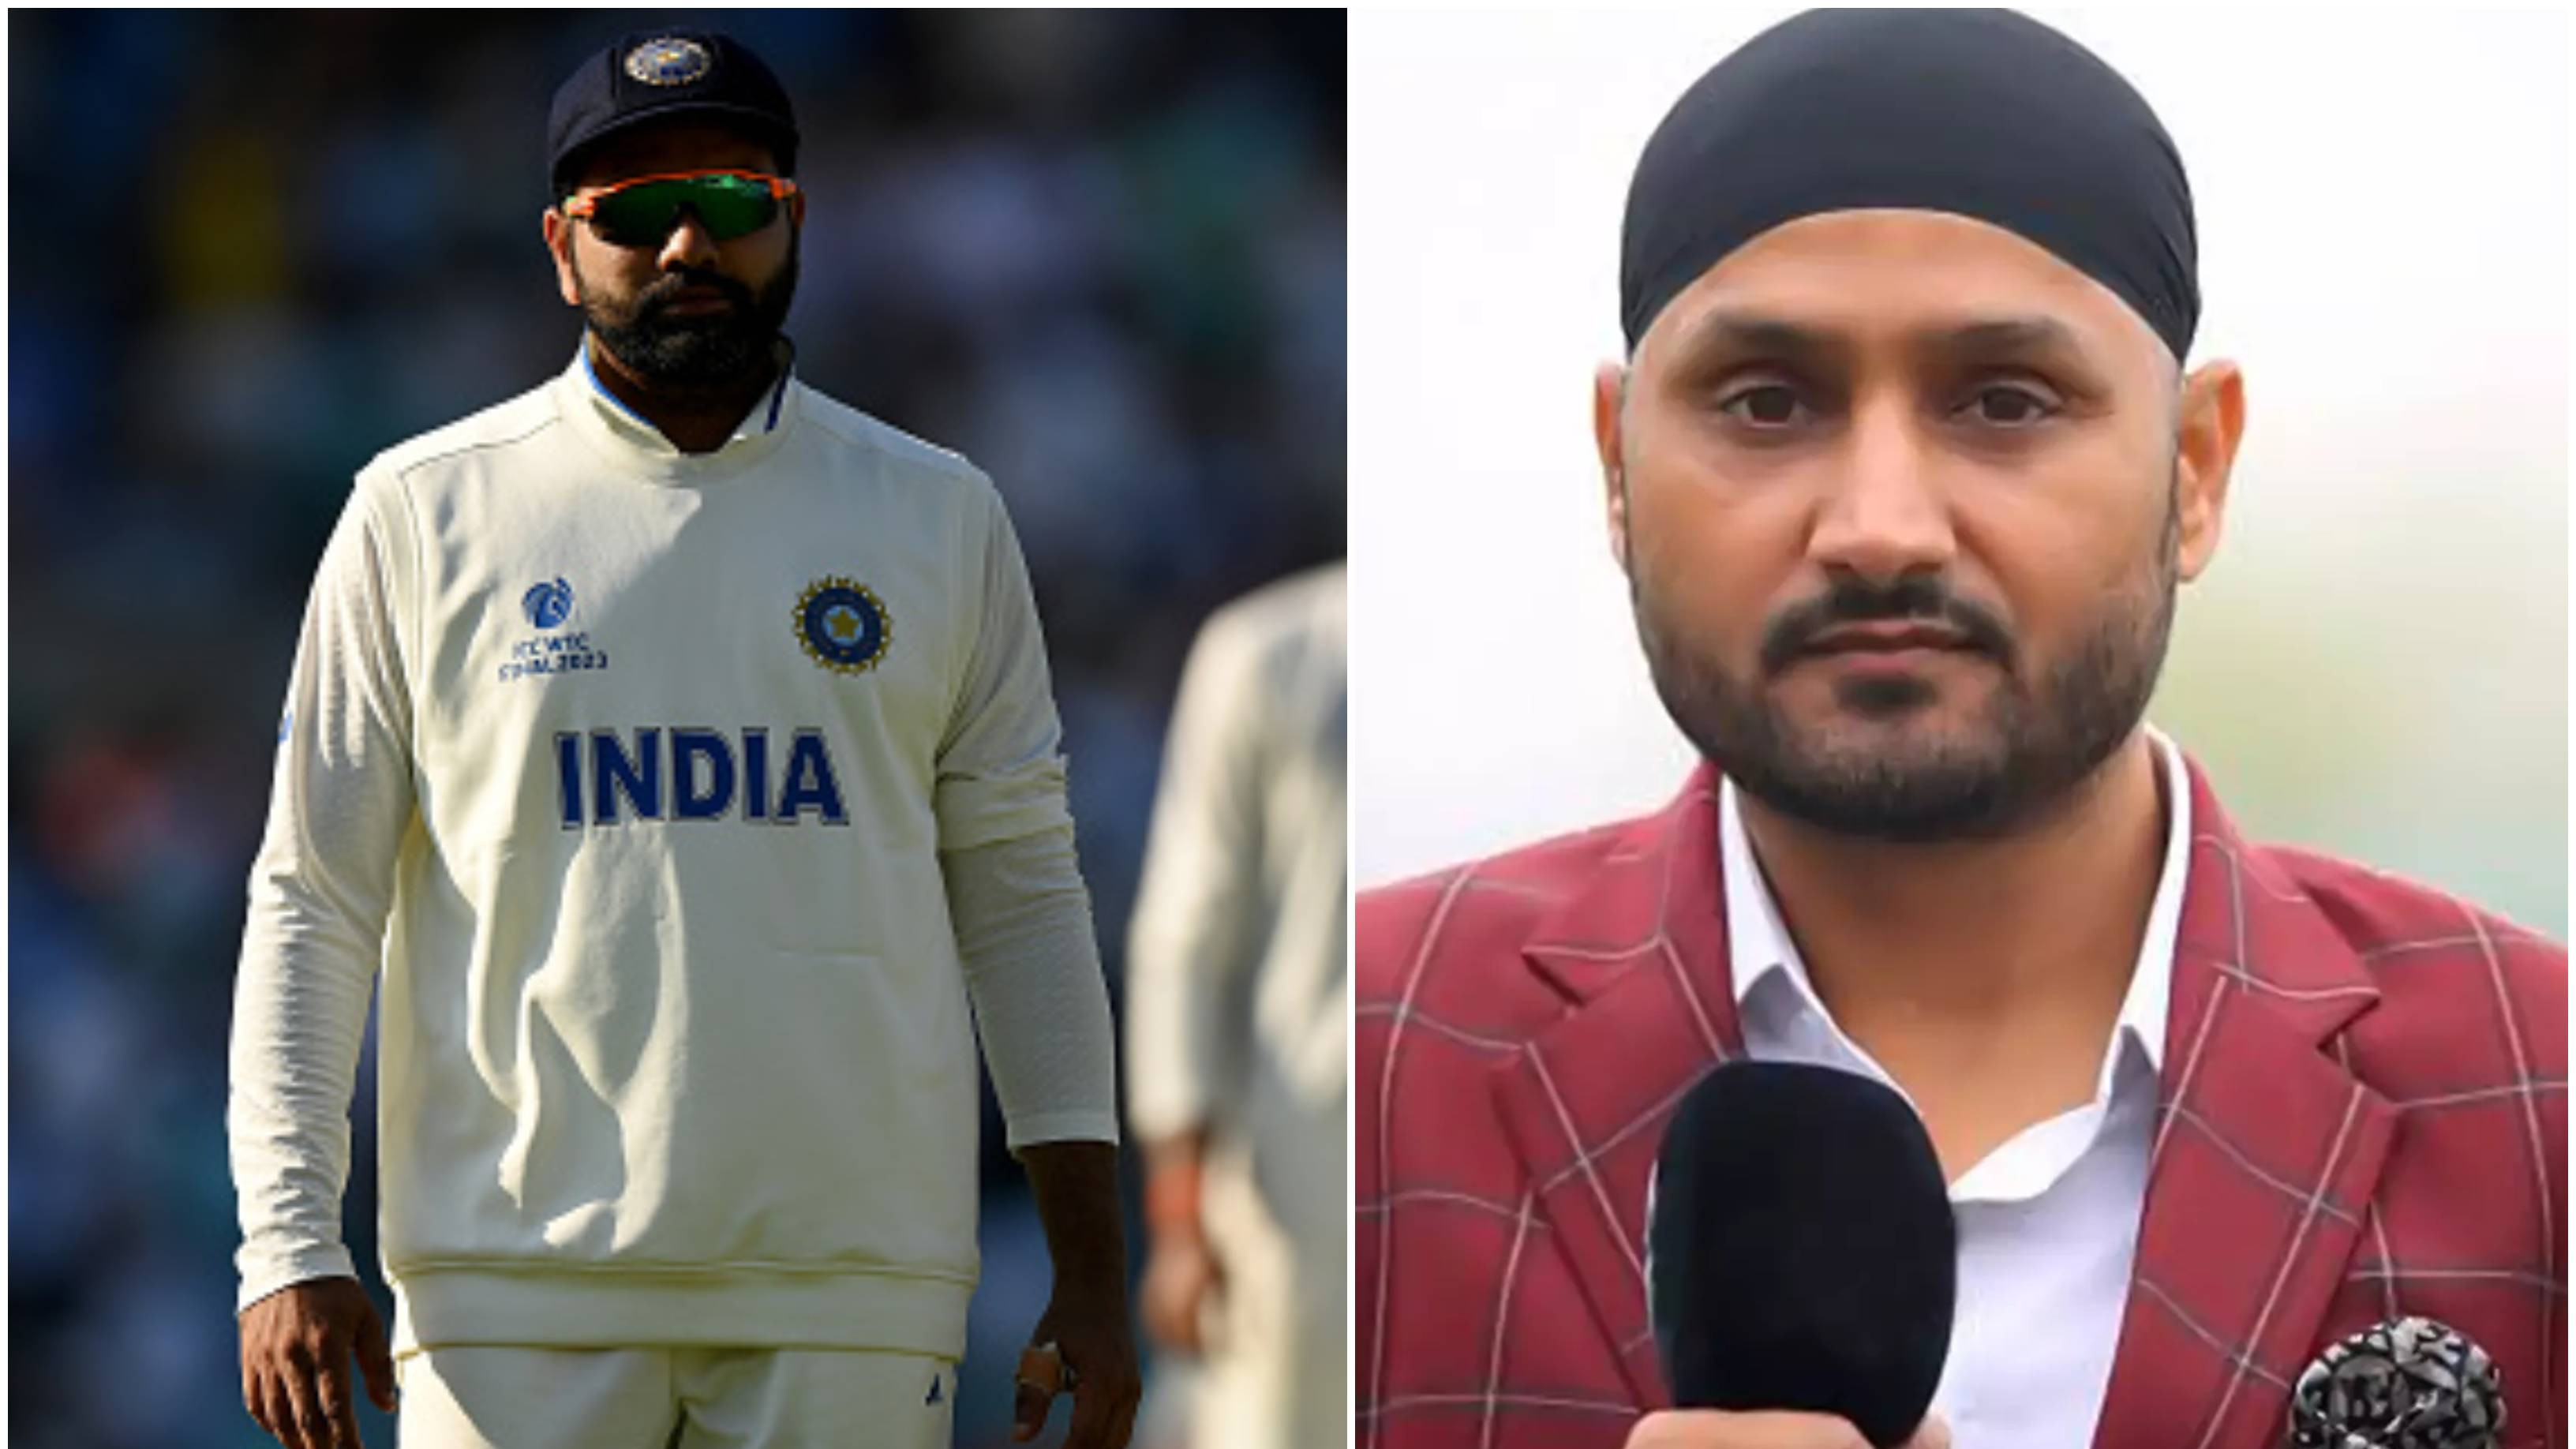 “It is not there any of the big events,” Harbhajan opposes Rohit’s